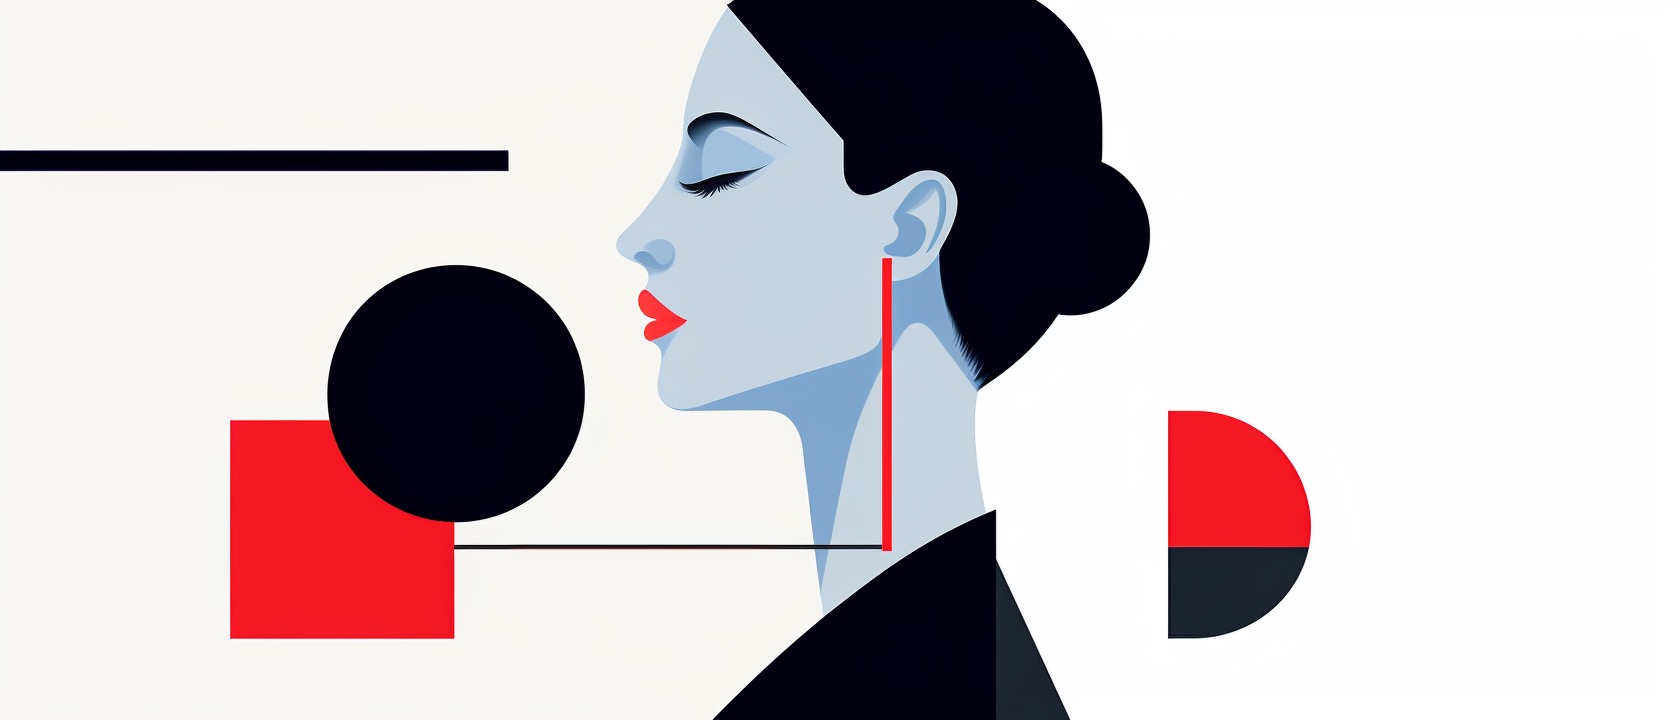 This minimalist and abstract image of a serene woman composed of precise geometric shapes and contrasting colors symbolizes the rigid standards and inner conflict of perfectionism, while also highlighting the calm and balanced state of self-acceptance essential for healthy self-esteem.